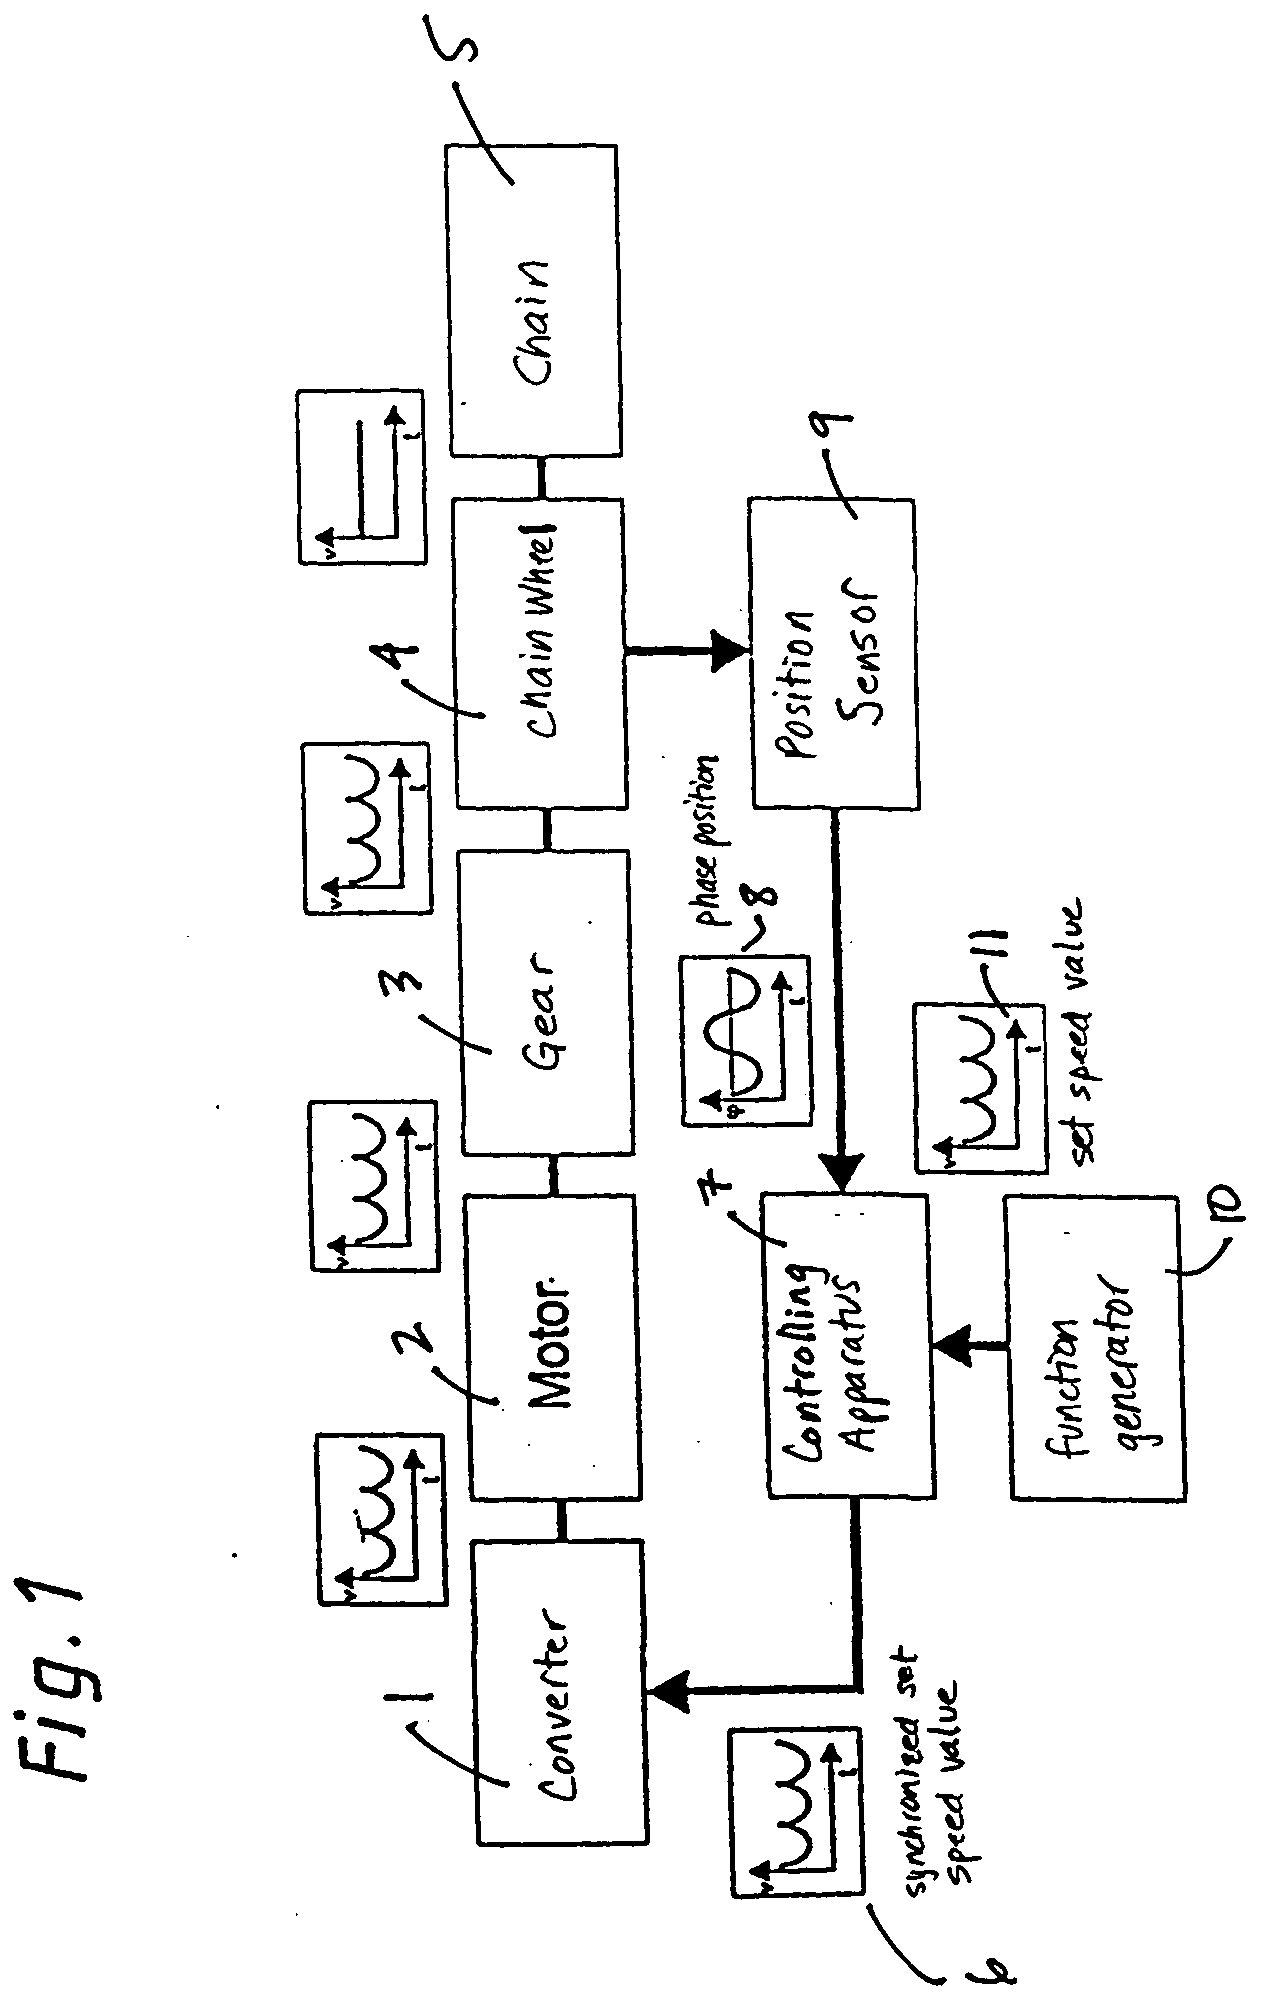 Method and device for reducing the polygon effect in the reversing area of pedestrain conveyor system